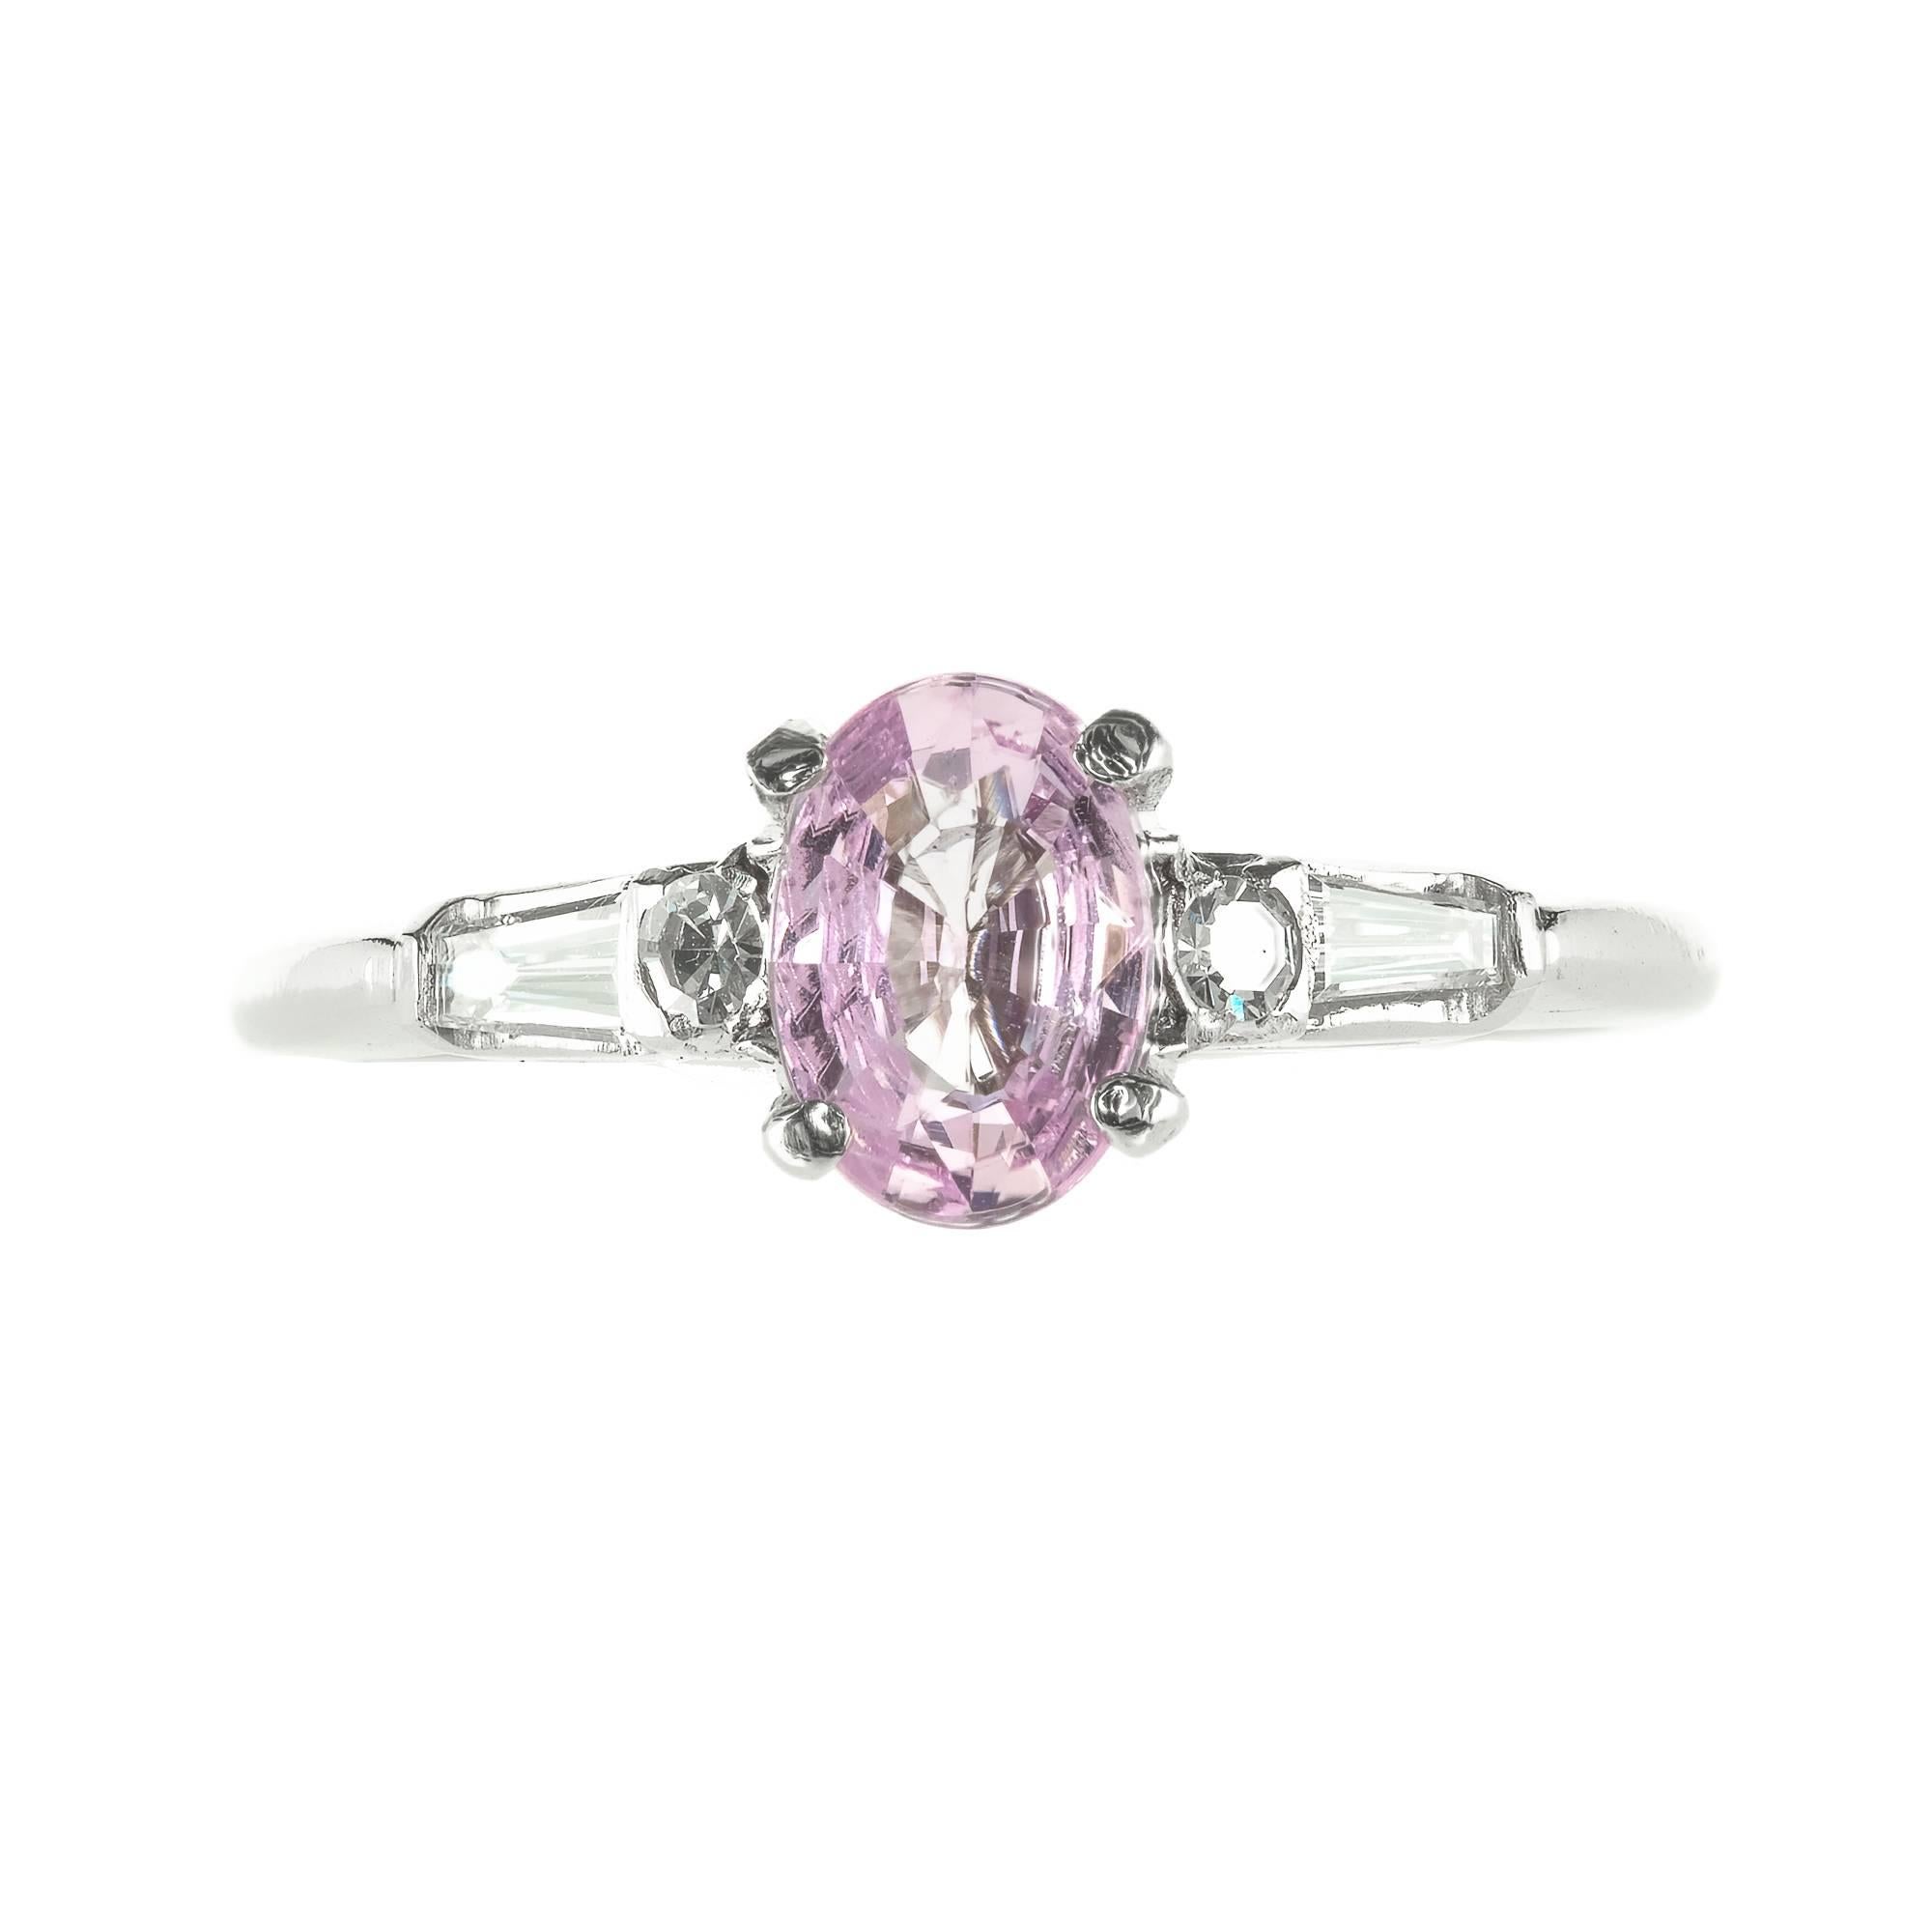 Natural GIA certified no heat soft light purplish pink Sapphire and diamond engagement ring in a platinum setting.

1 oval light purplish pink Sapphire, approx. total weight .74cts, no heat, GIA certificate #2171619035
2 round diamonds, approx.